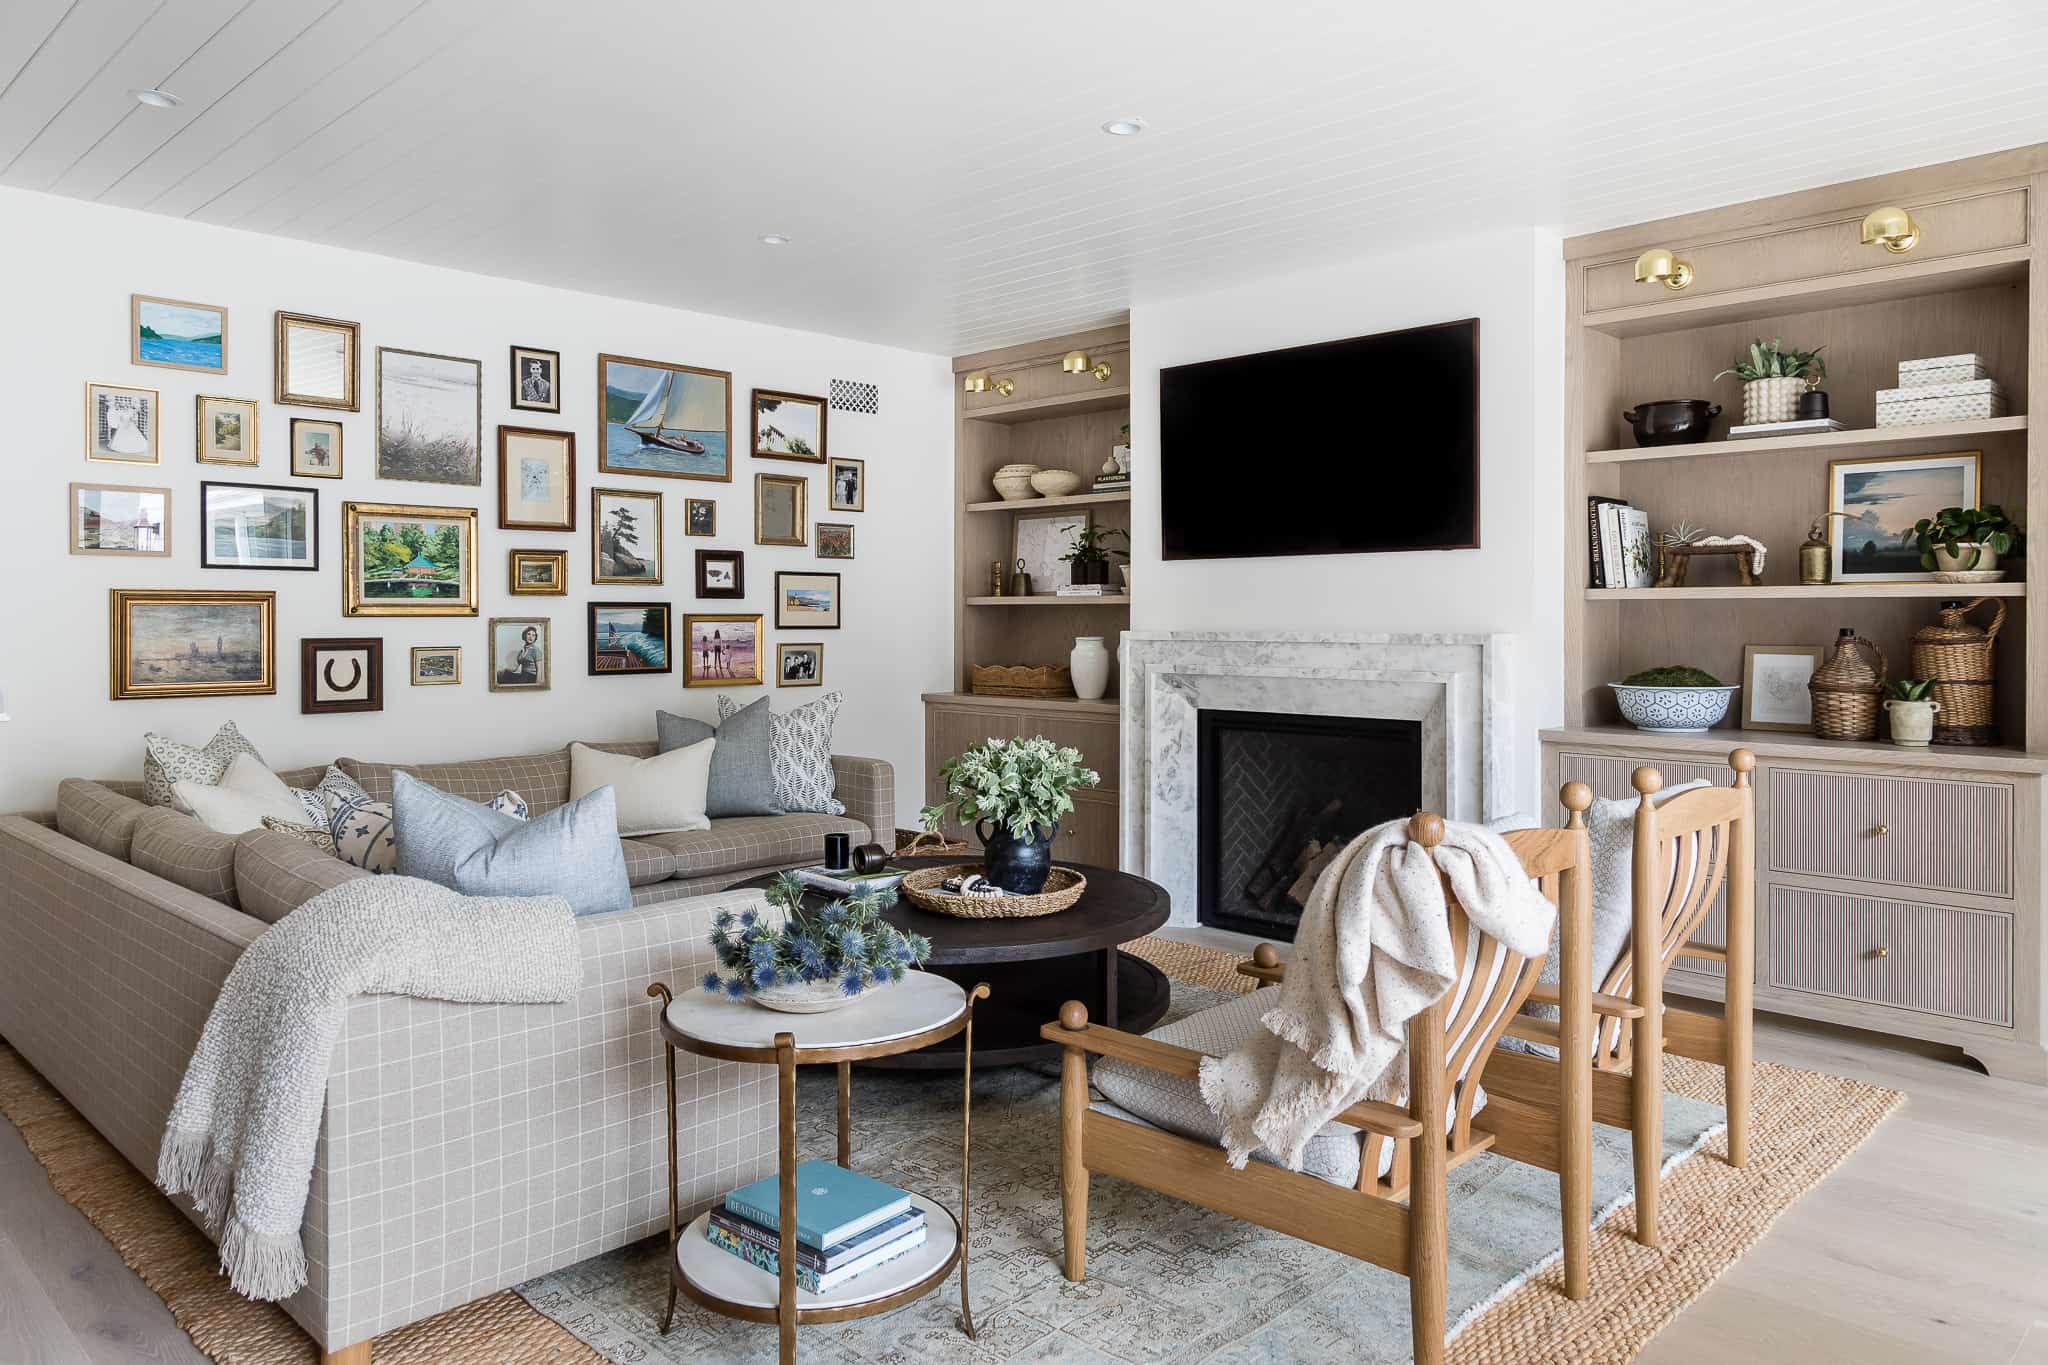 Nellie Gail Family Room - Mindy Gayer Design Co.